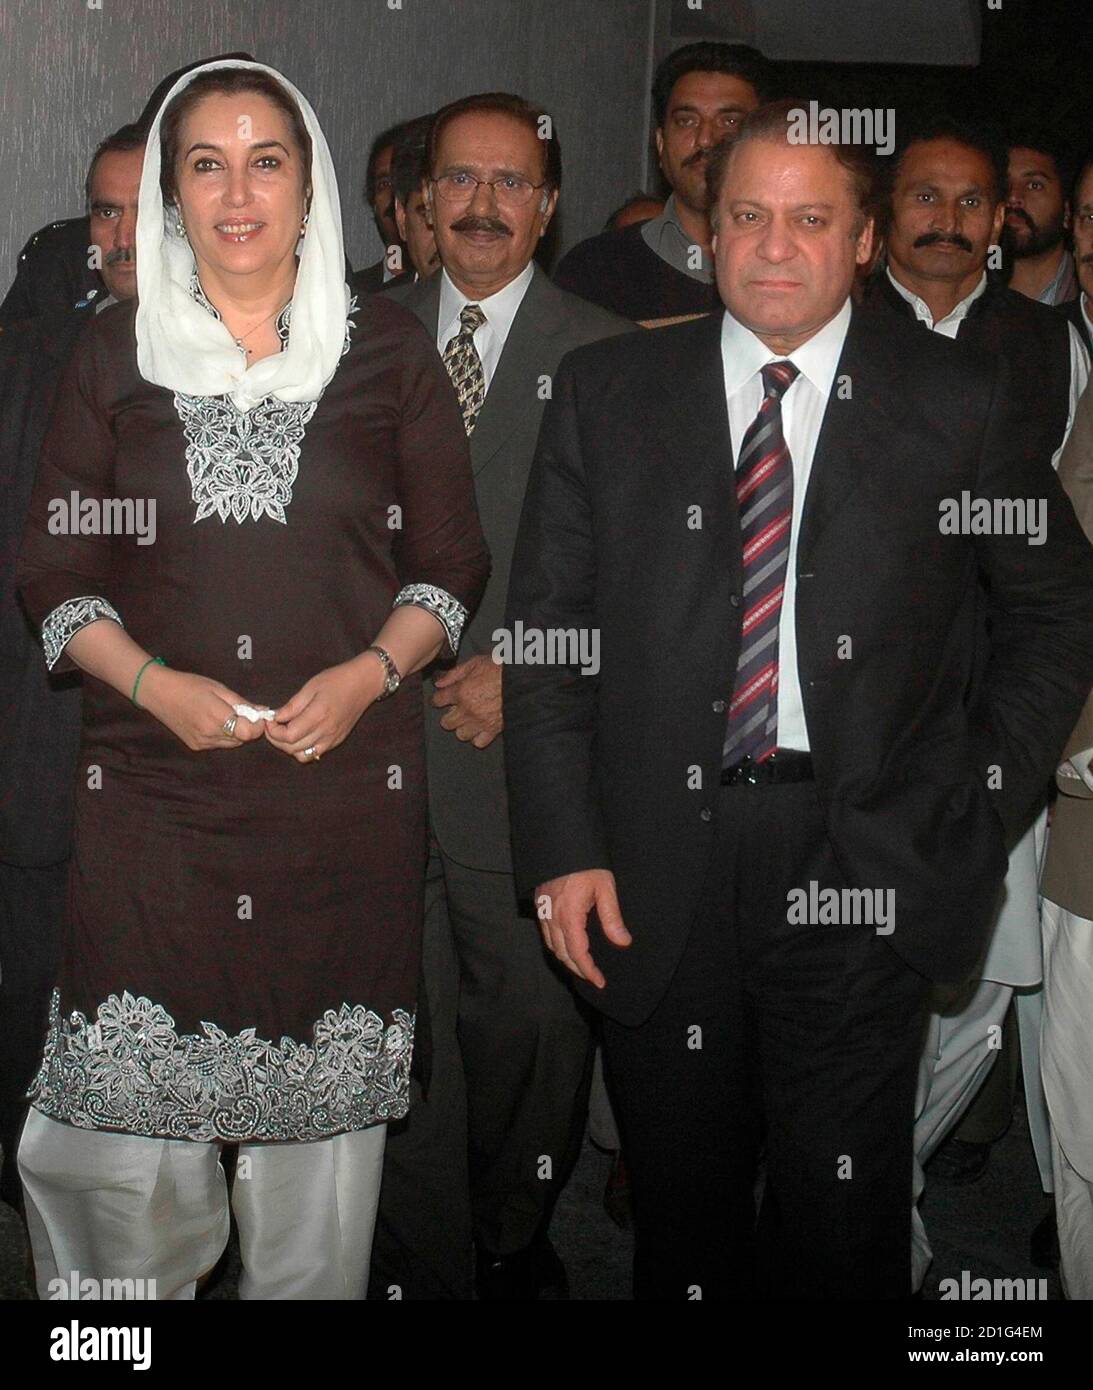 Pakistani opposition leader Benazir Bhutto (L) arrives with her political  rival, former Prime Minister Nawaz Sharif (R), for a news conference at her  residence in Islamabad December 3, 2007. Pakistan's Election Commission